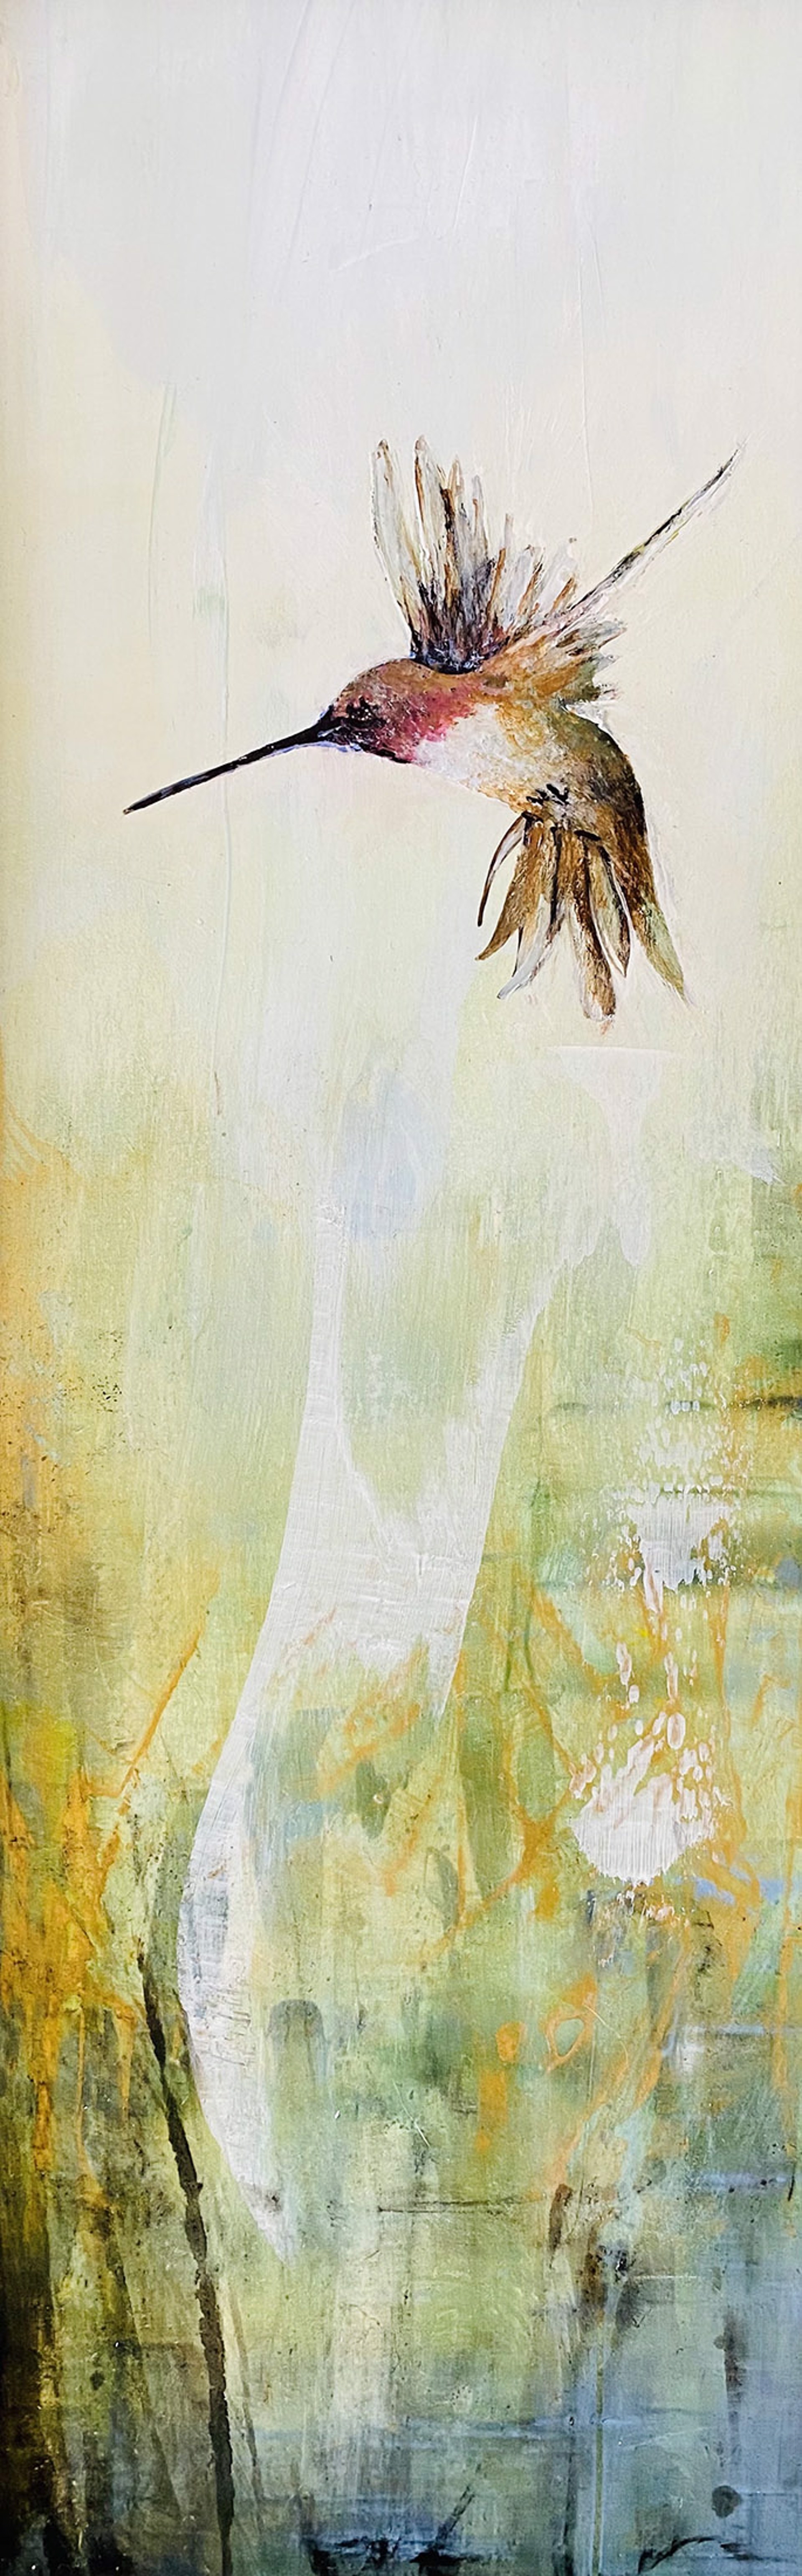 Single Hummingbird In Flight Held In Above Abstracted Veils Of Warm Greens , Insinuated Foliage